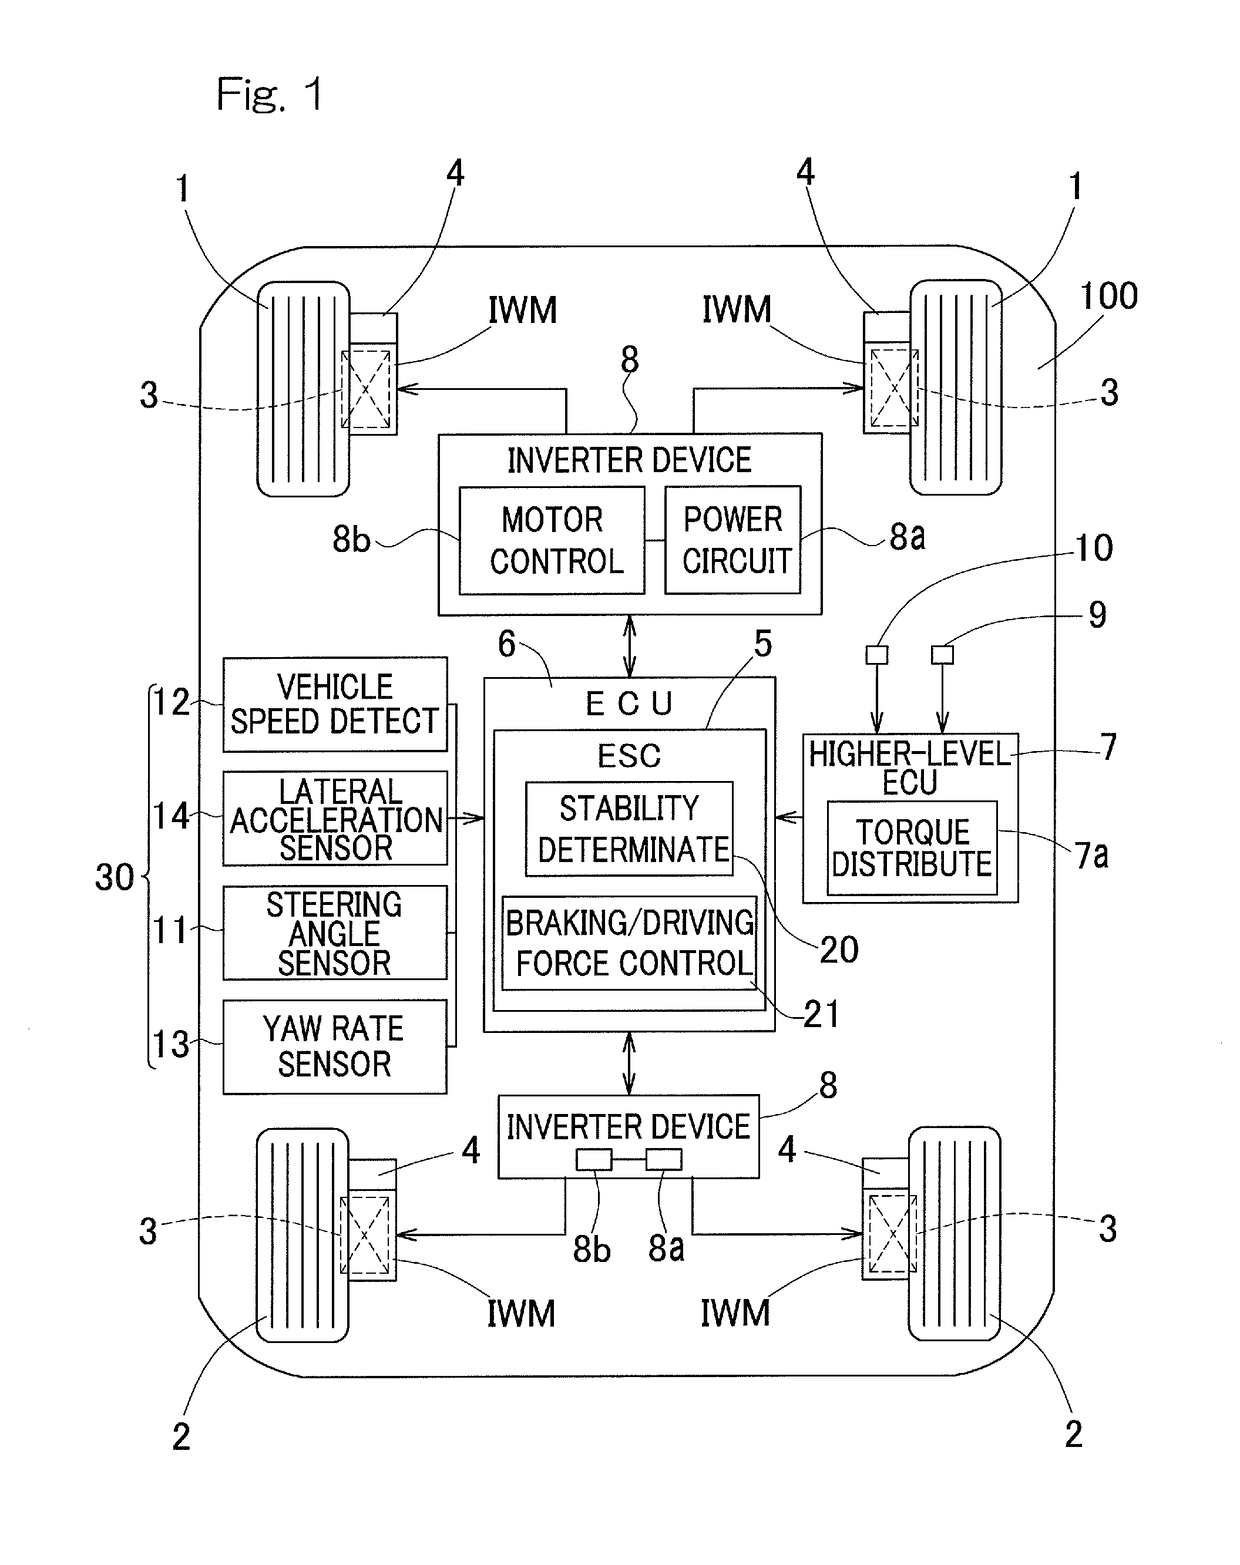 Electronic stability control system for vehicle